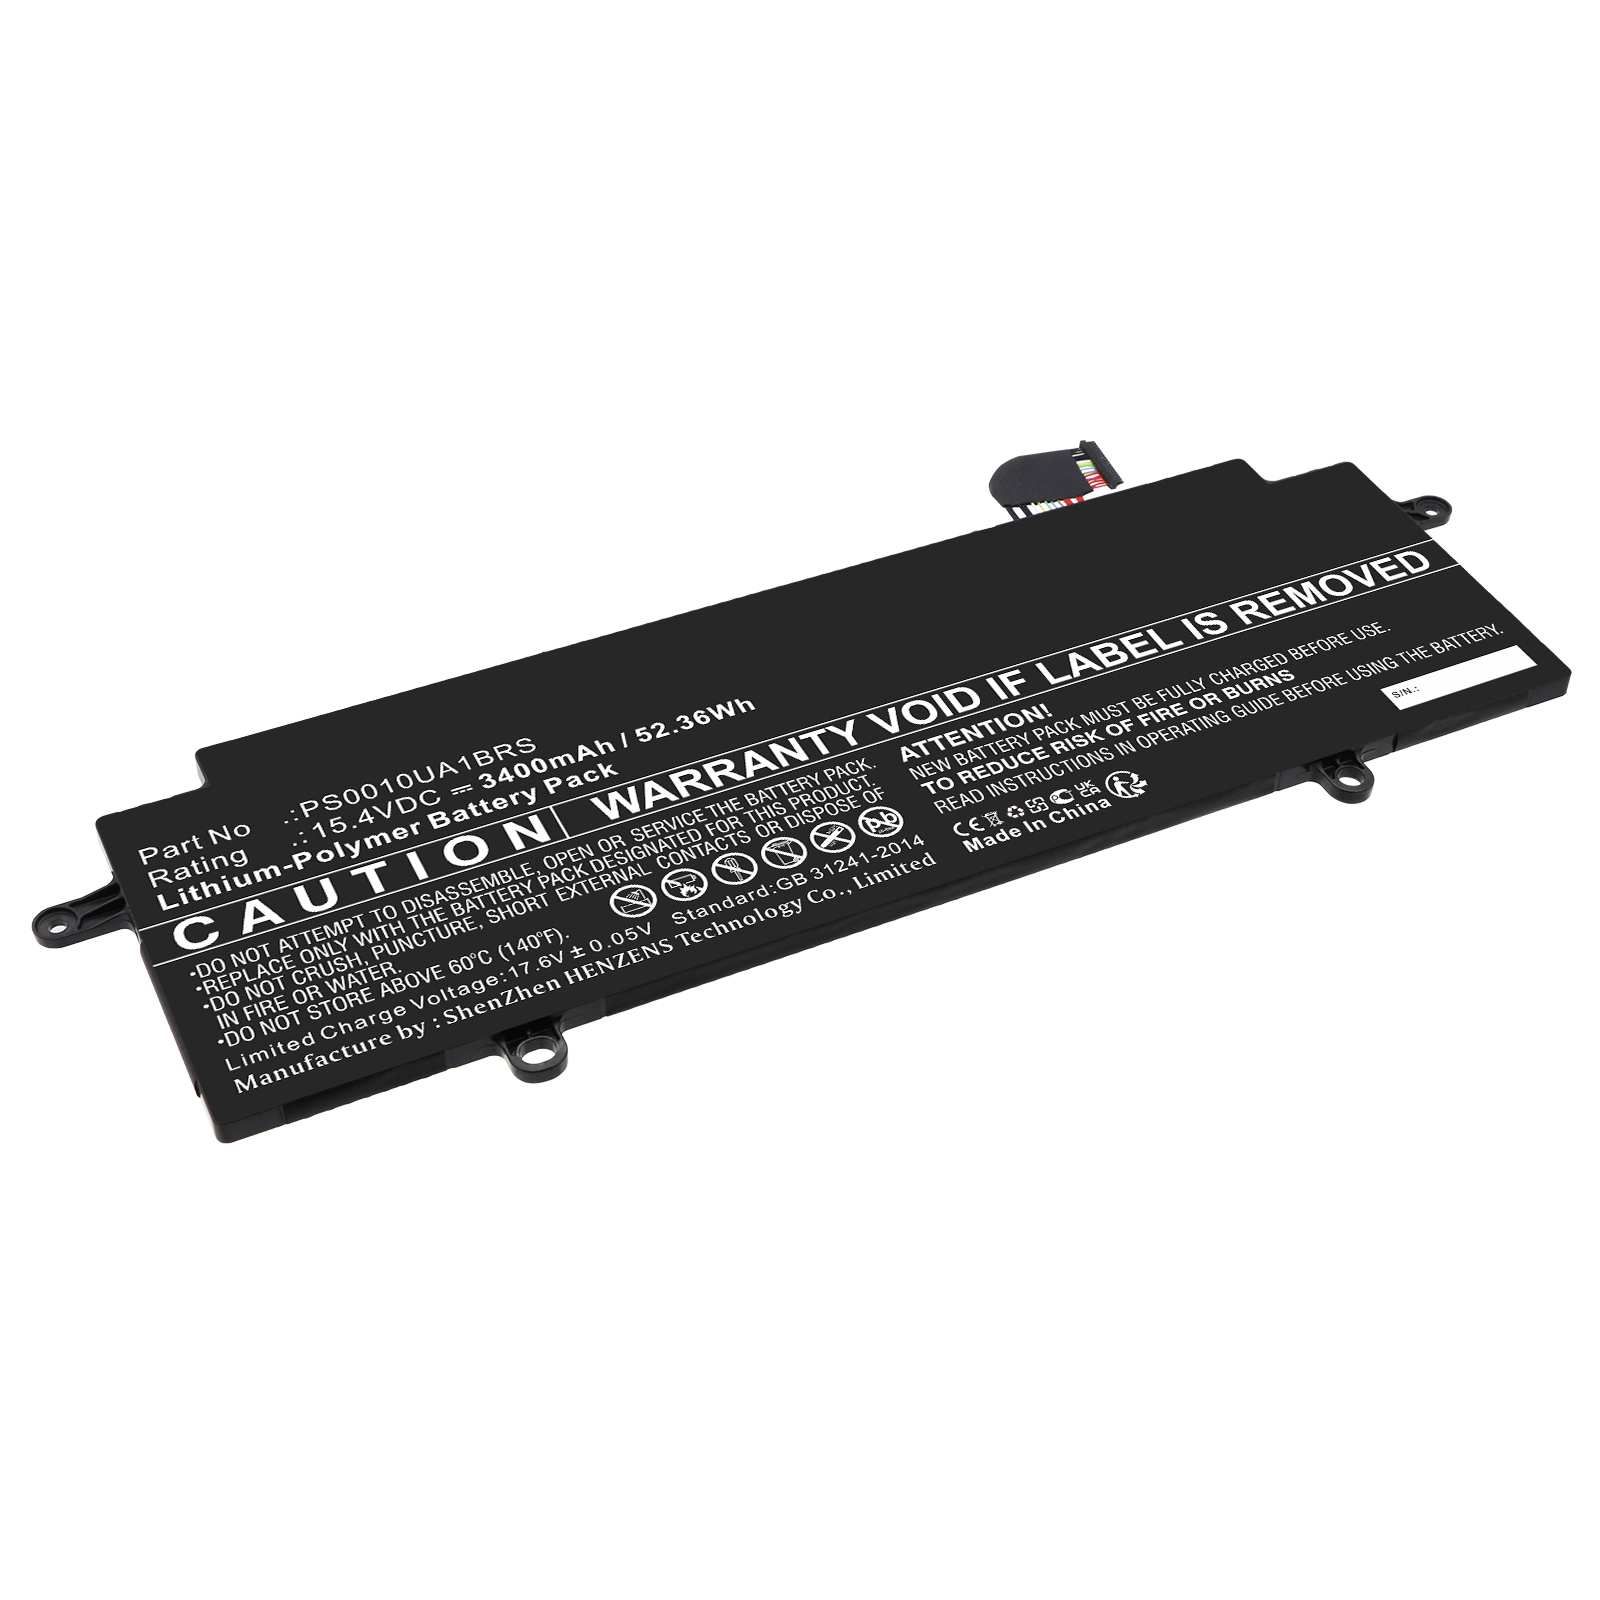 Batteries for DynabookLaptop